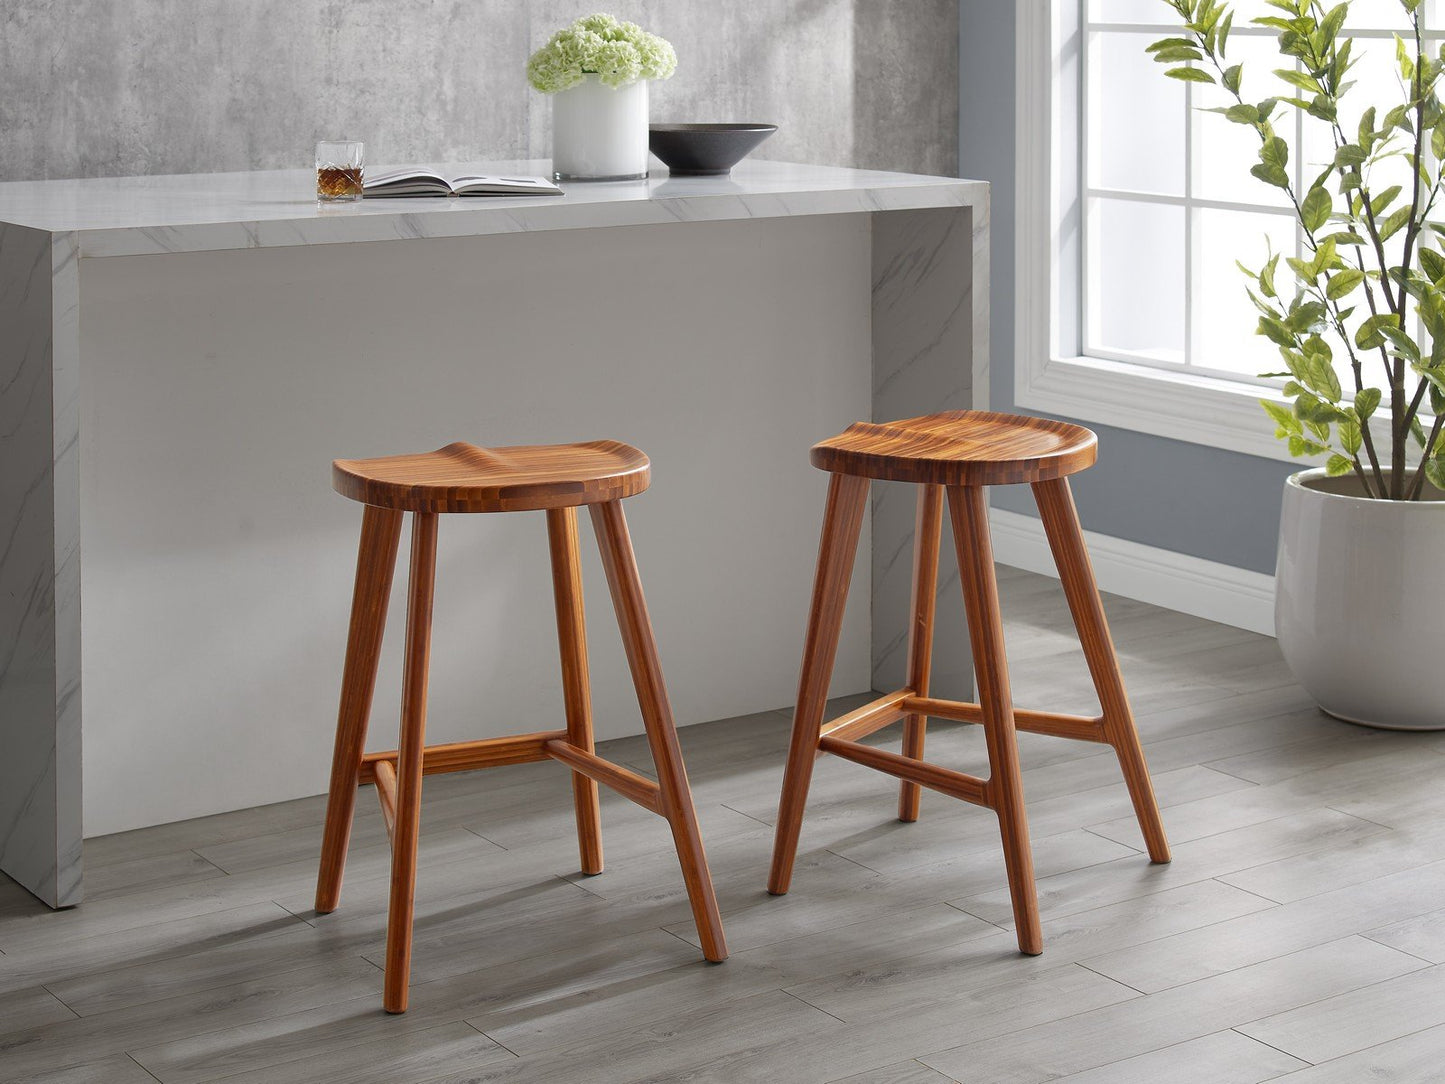 Greenington Max Stool in Counter Height, Amber - GM0008AM - 10